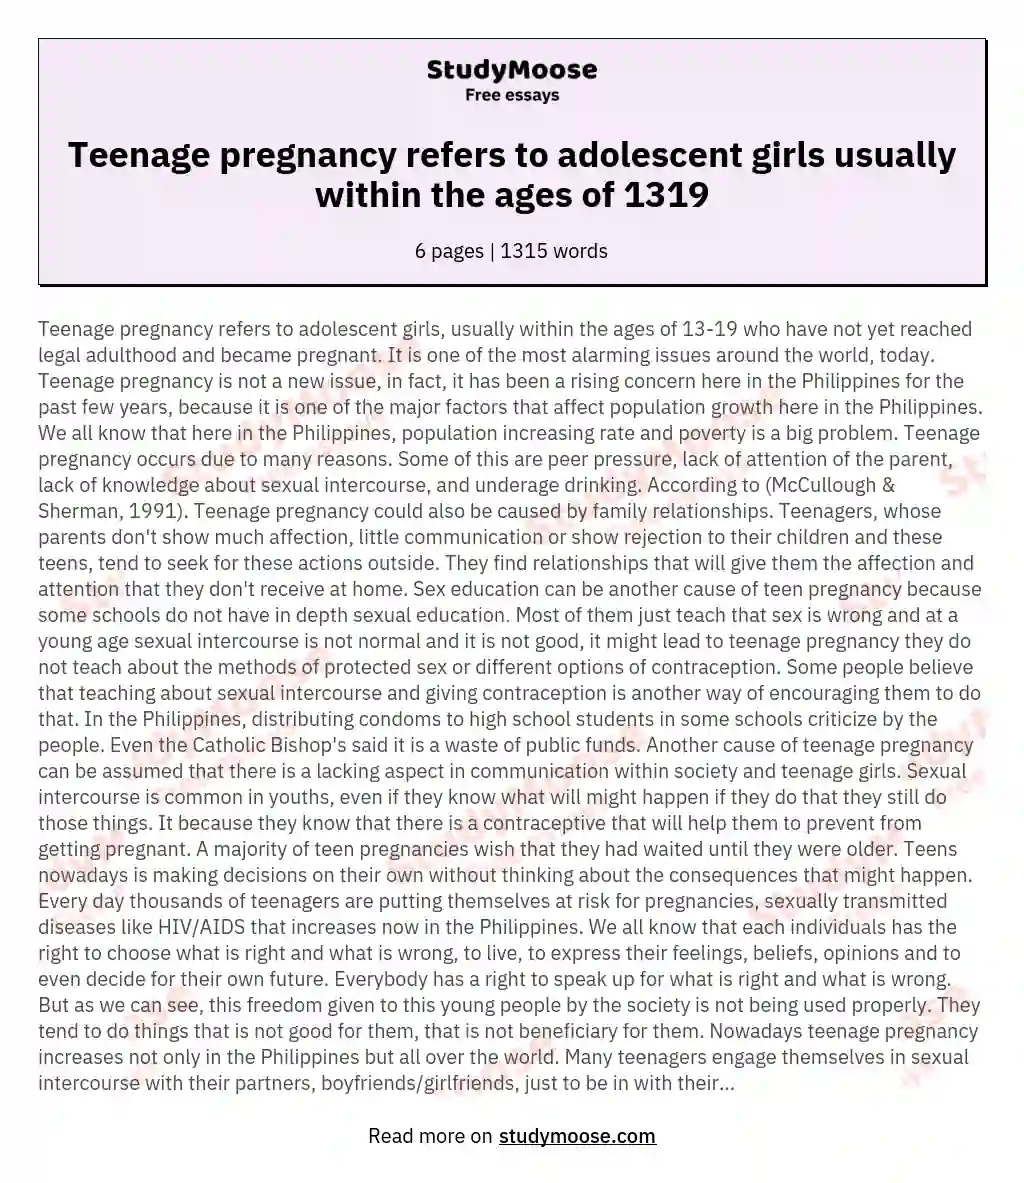 Teenage pregnancy refers to adolescent girls usually within the ages of 1319